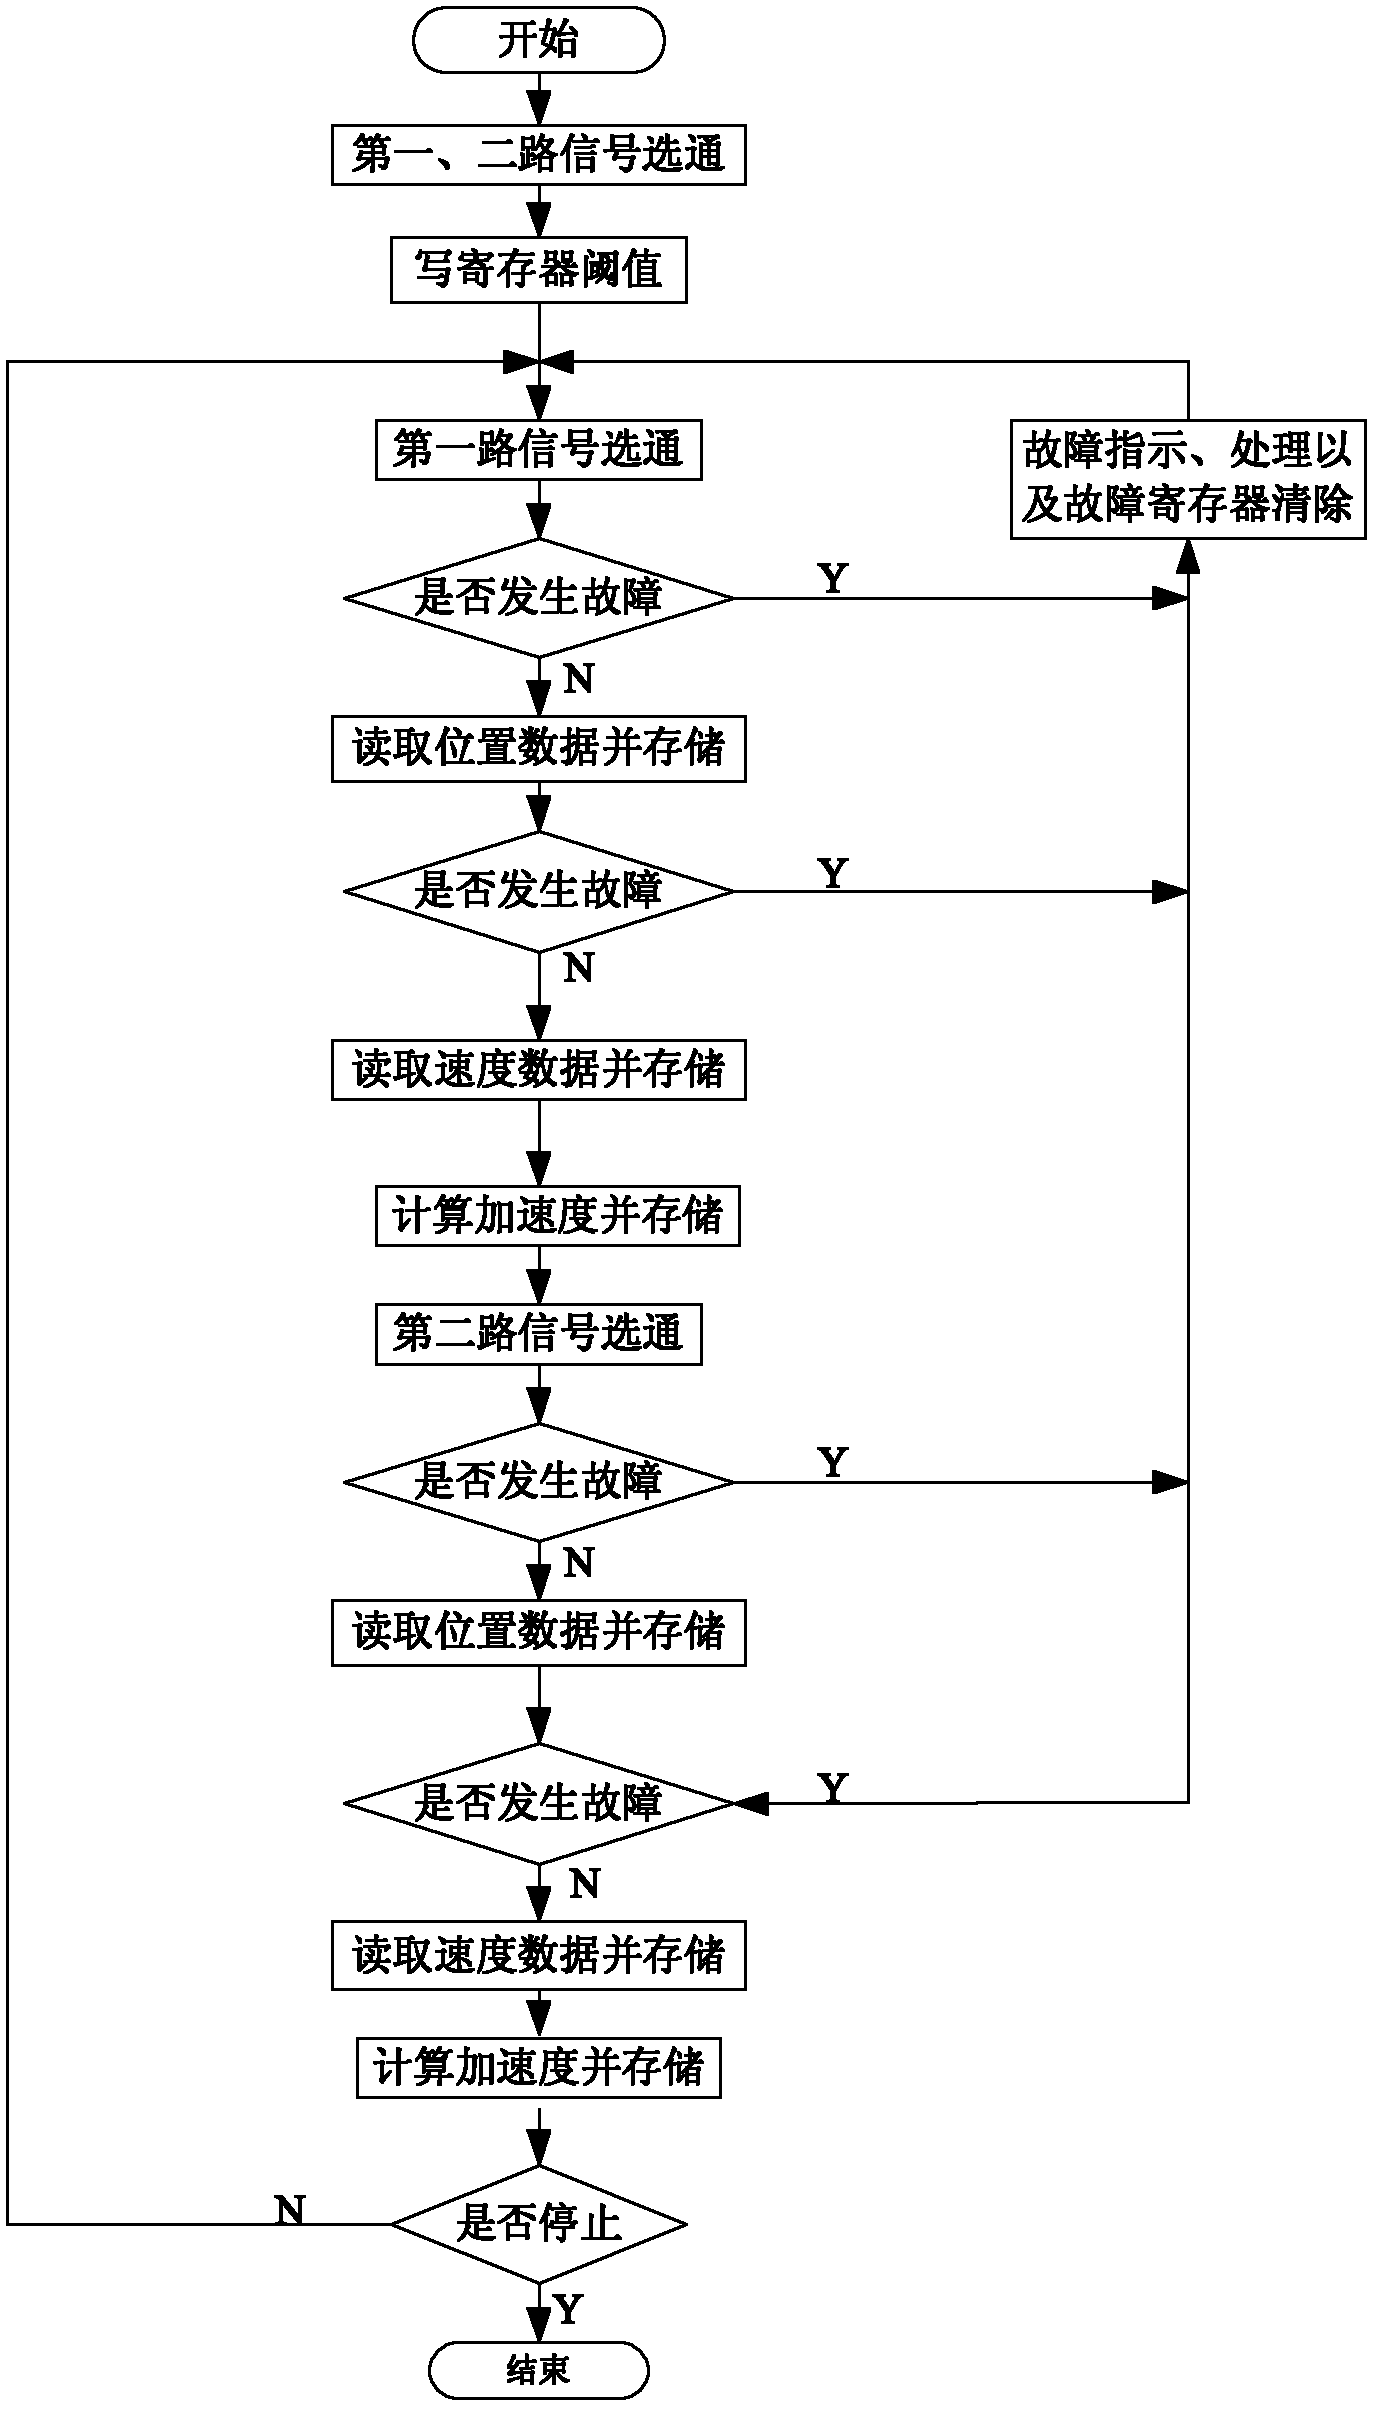 Decoding device and method for rotary transformer based on single FPGA (Field Programmable Gate Array)